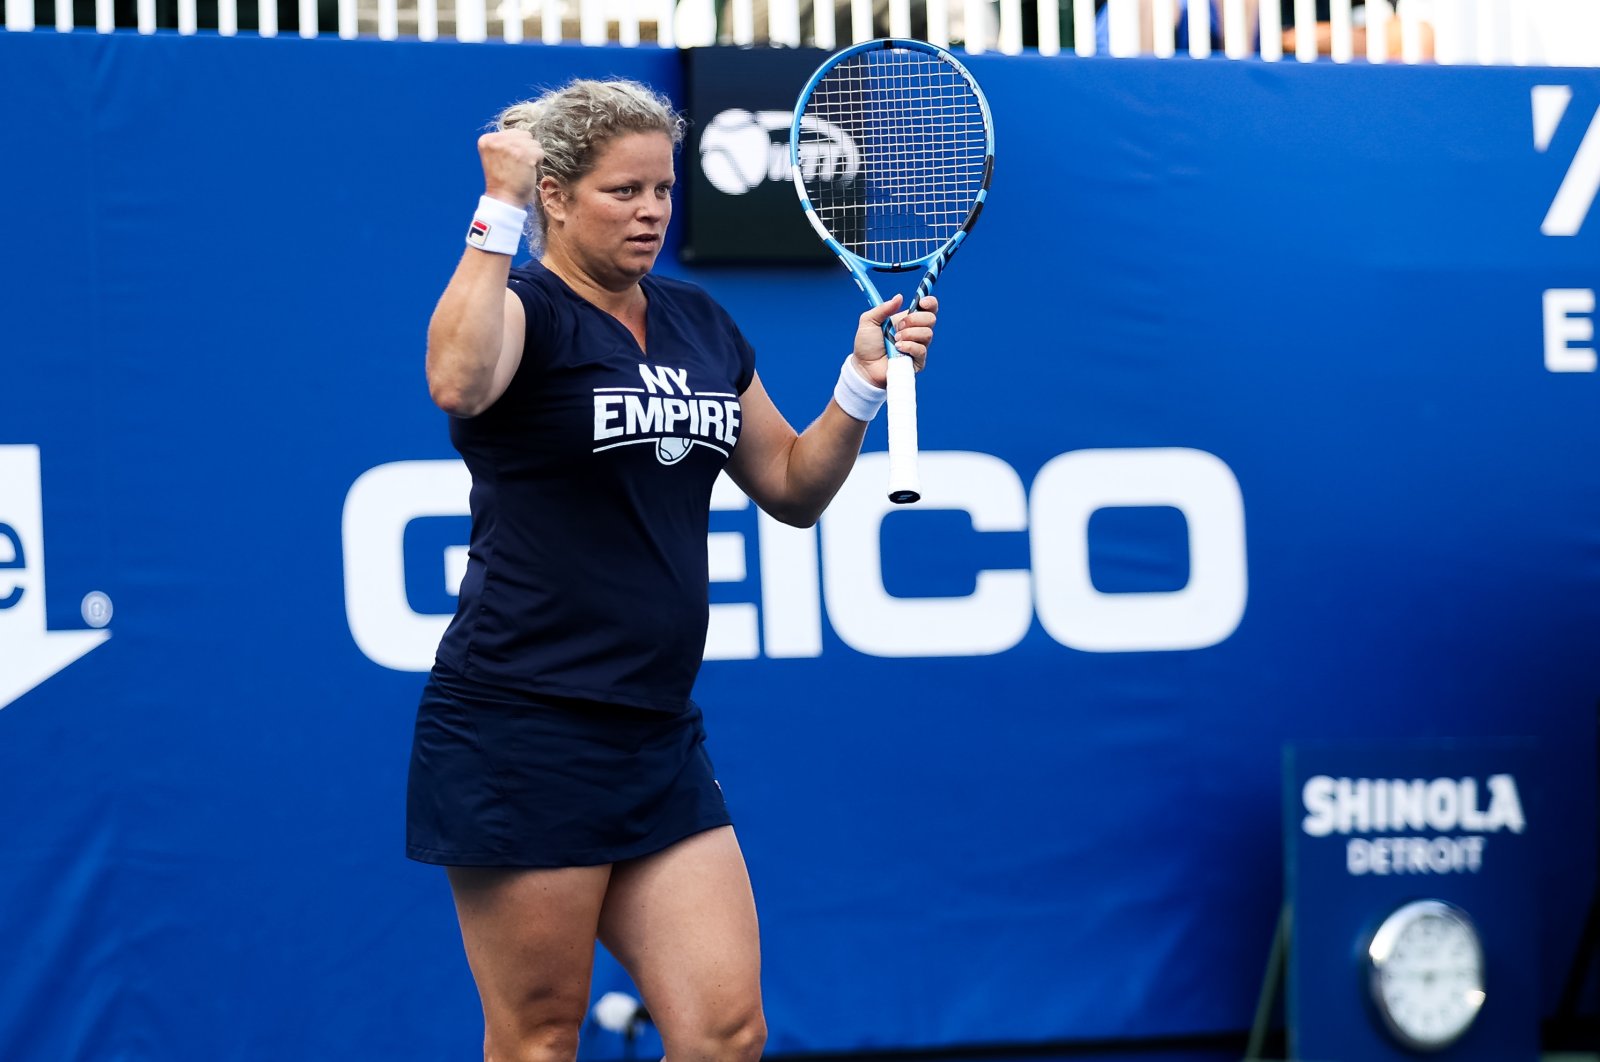 Kim Clijsters during a New York Empire match against San Diego Aviators, West Virginia, U.S., July 22, 2020. (Reuters Photo)